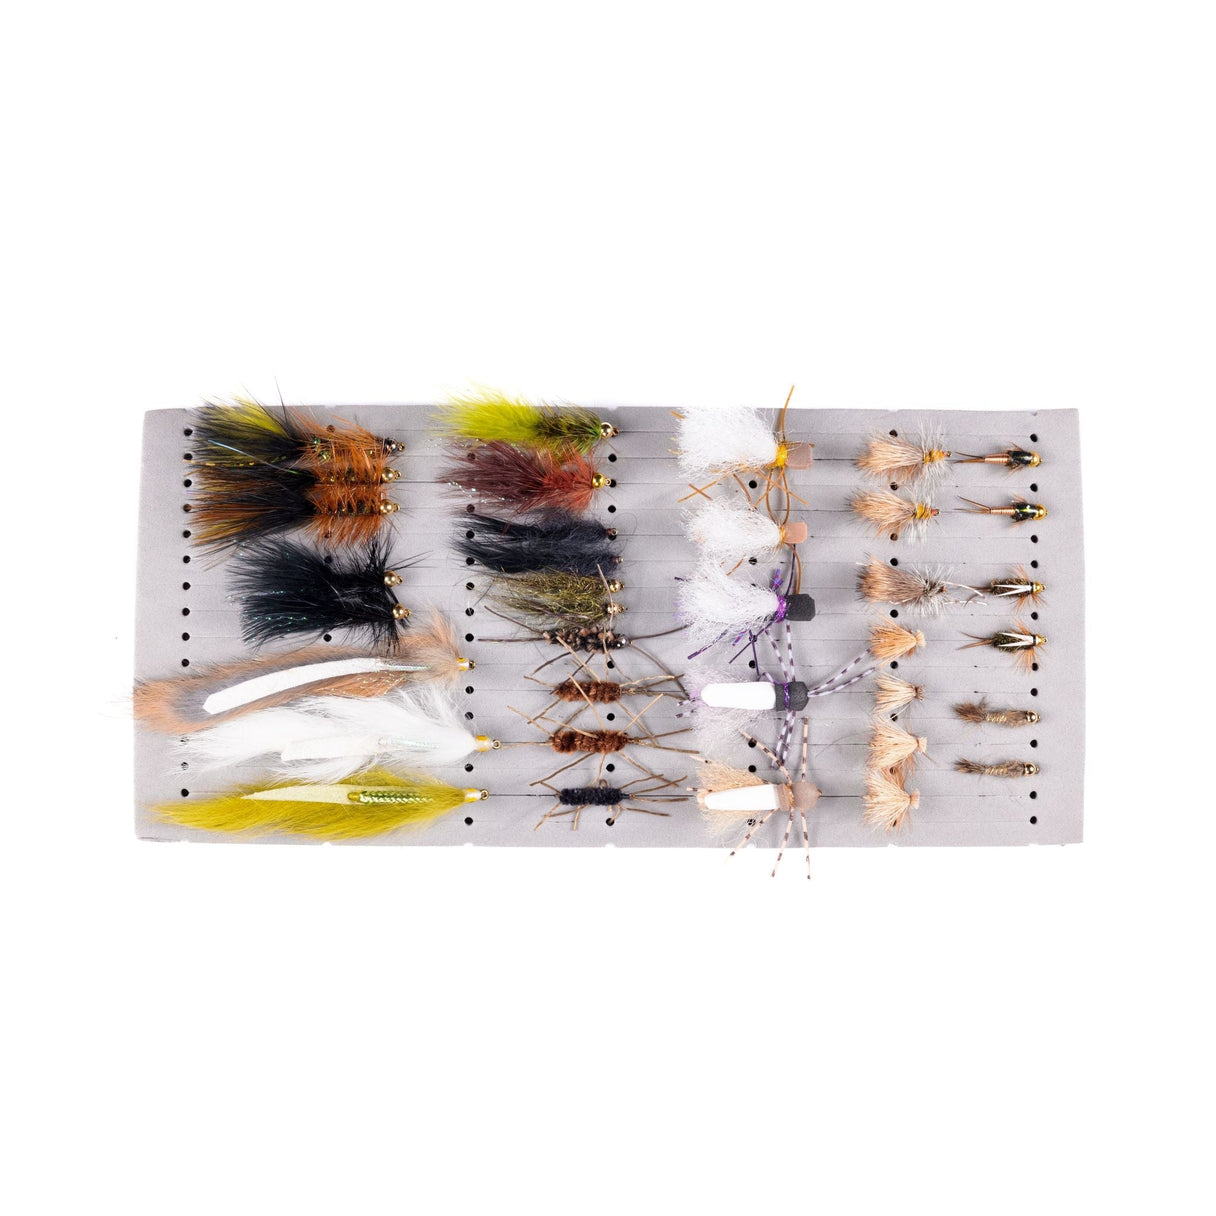 Jurassic Lake Fly Assortment: Guide Recommended Flies